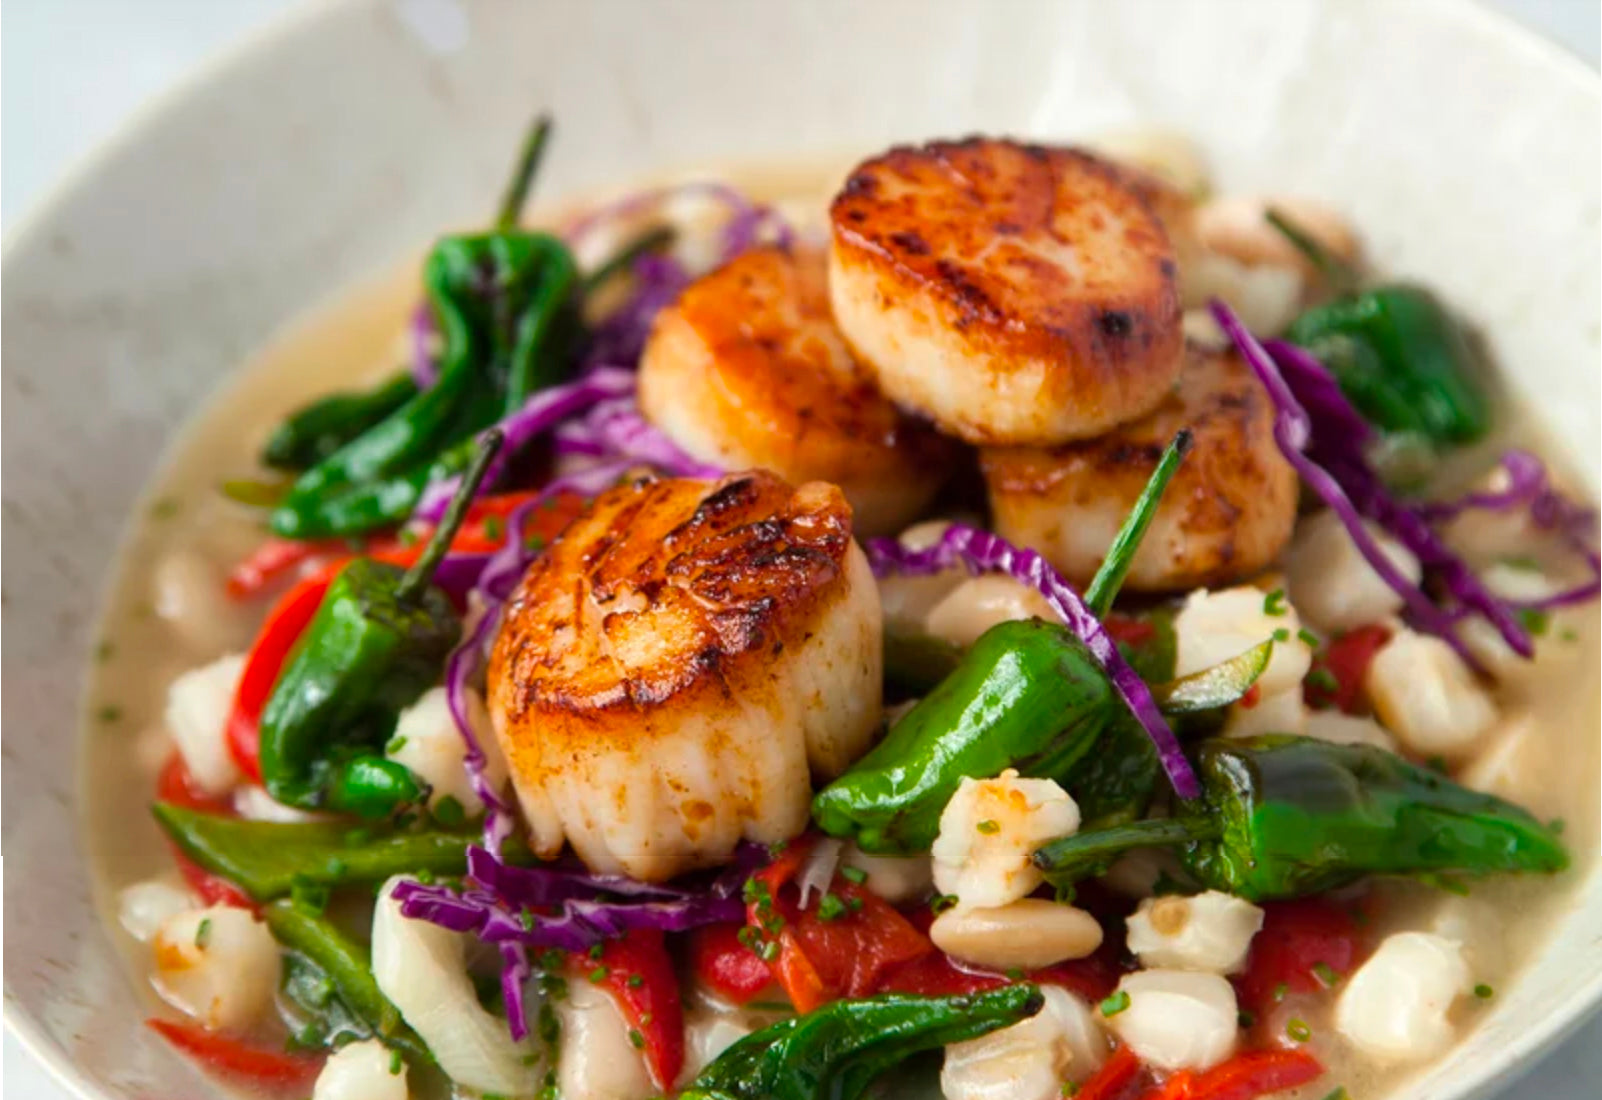 Hominy with Blistered Padron Peppers and Seared Scallops